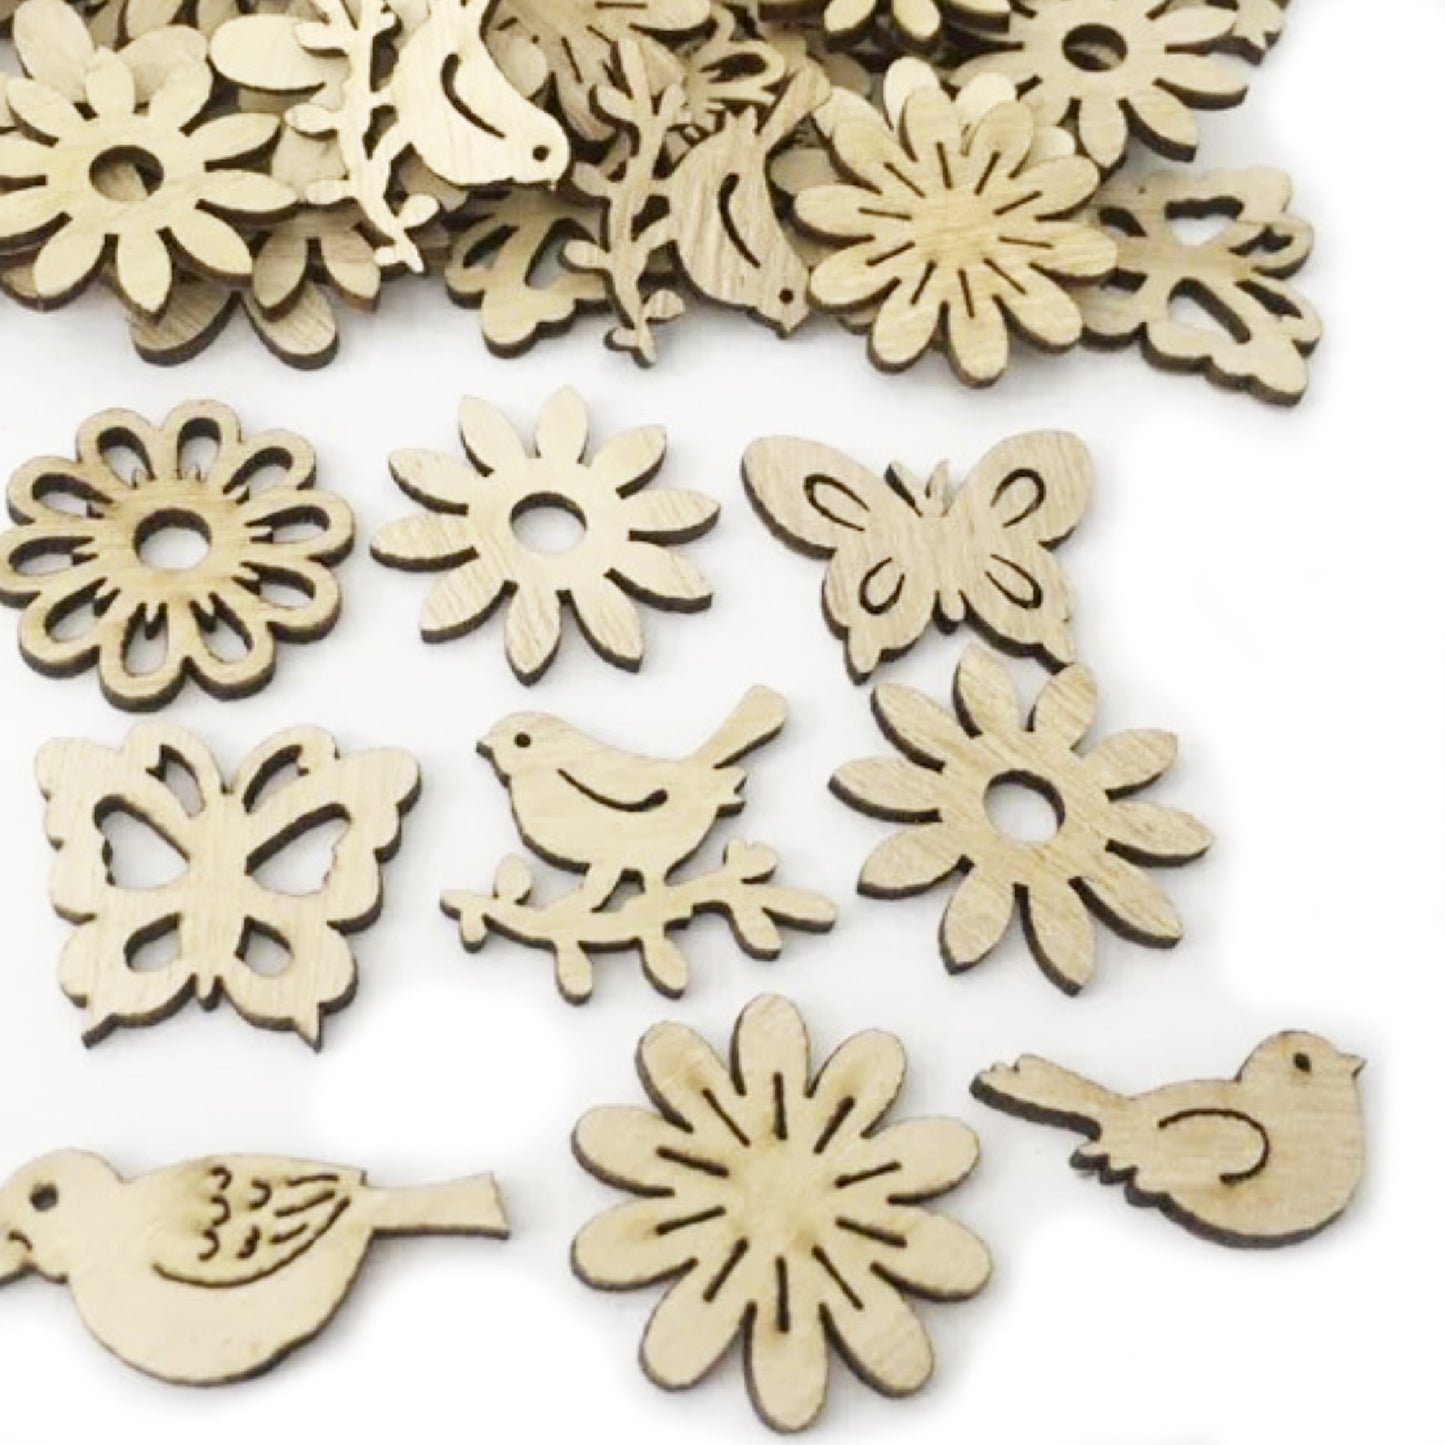 50pcs 27mm Wooden Birds Butterfly Flower Craft Scrapbook Wood Pieces Decorations Table Decorations